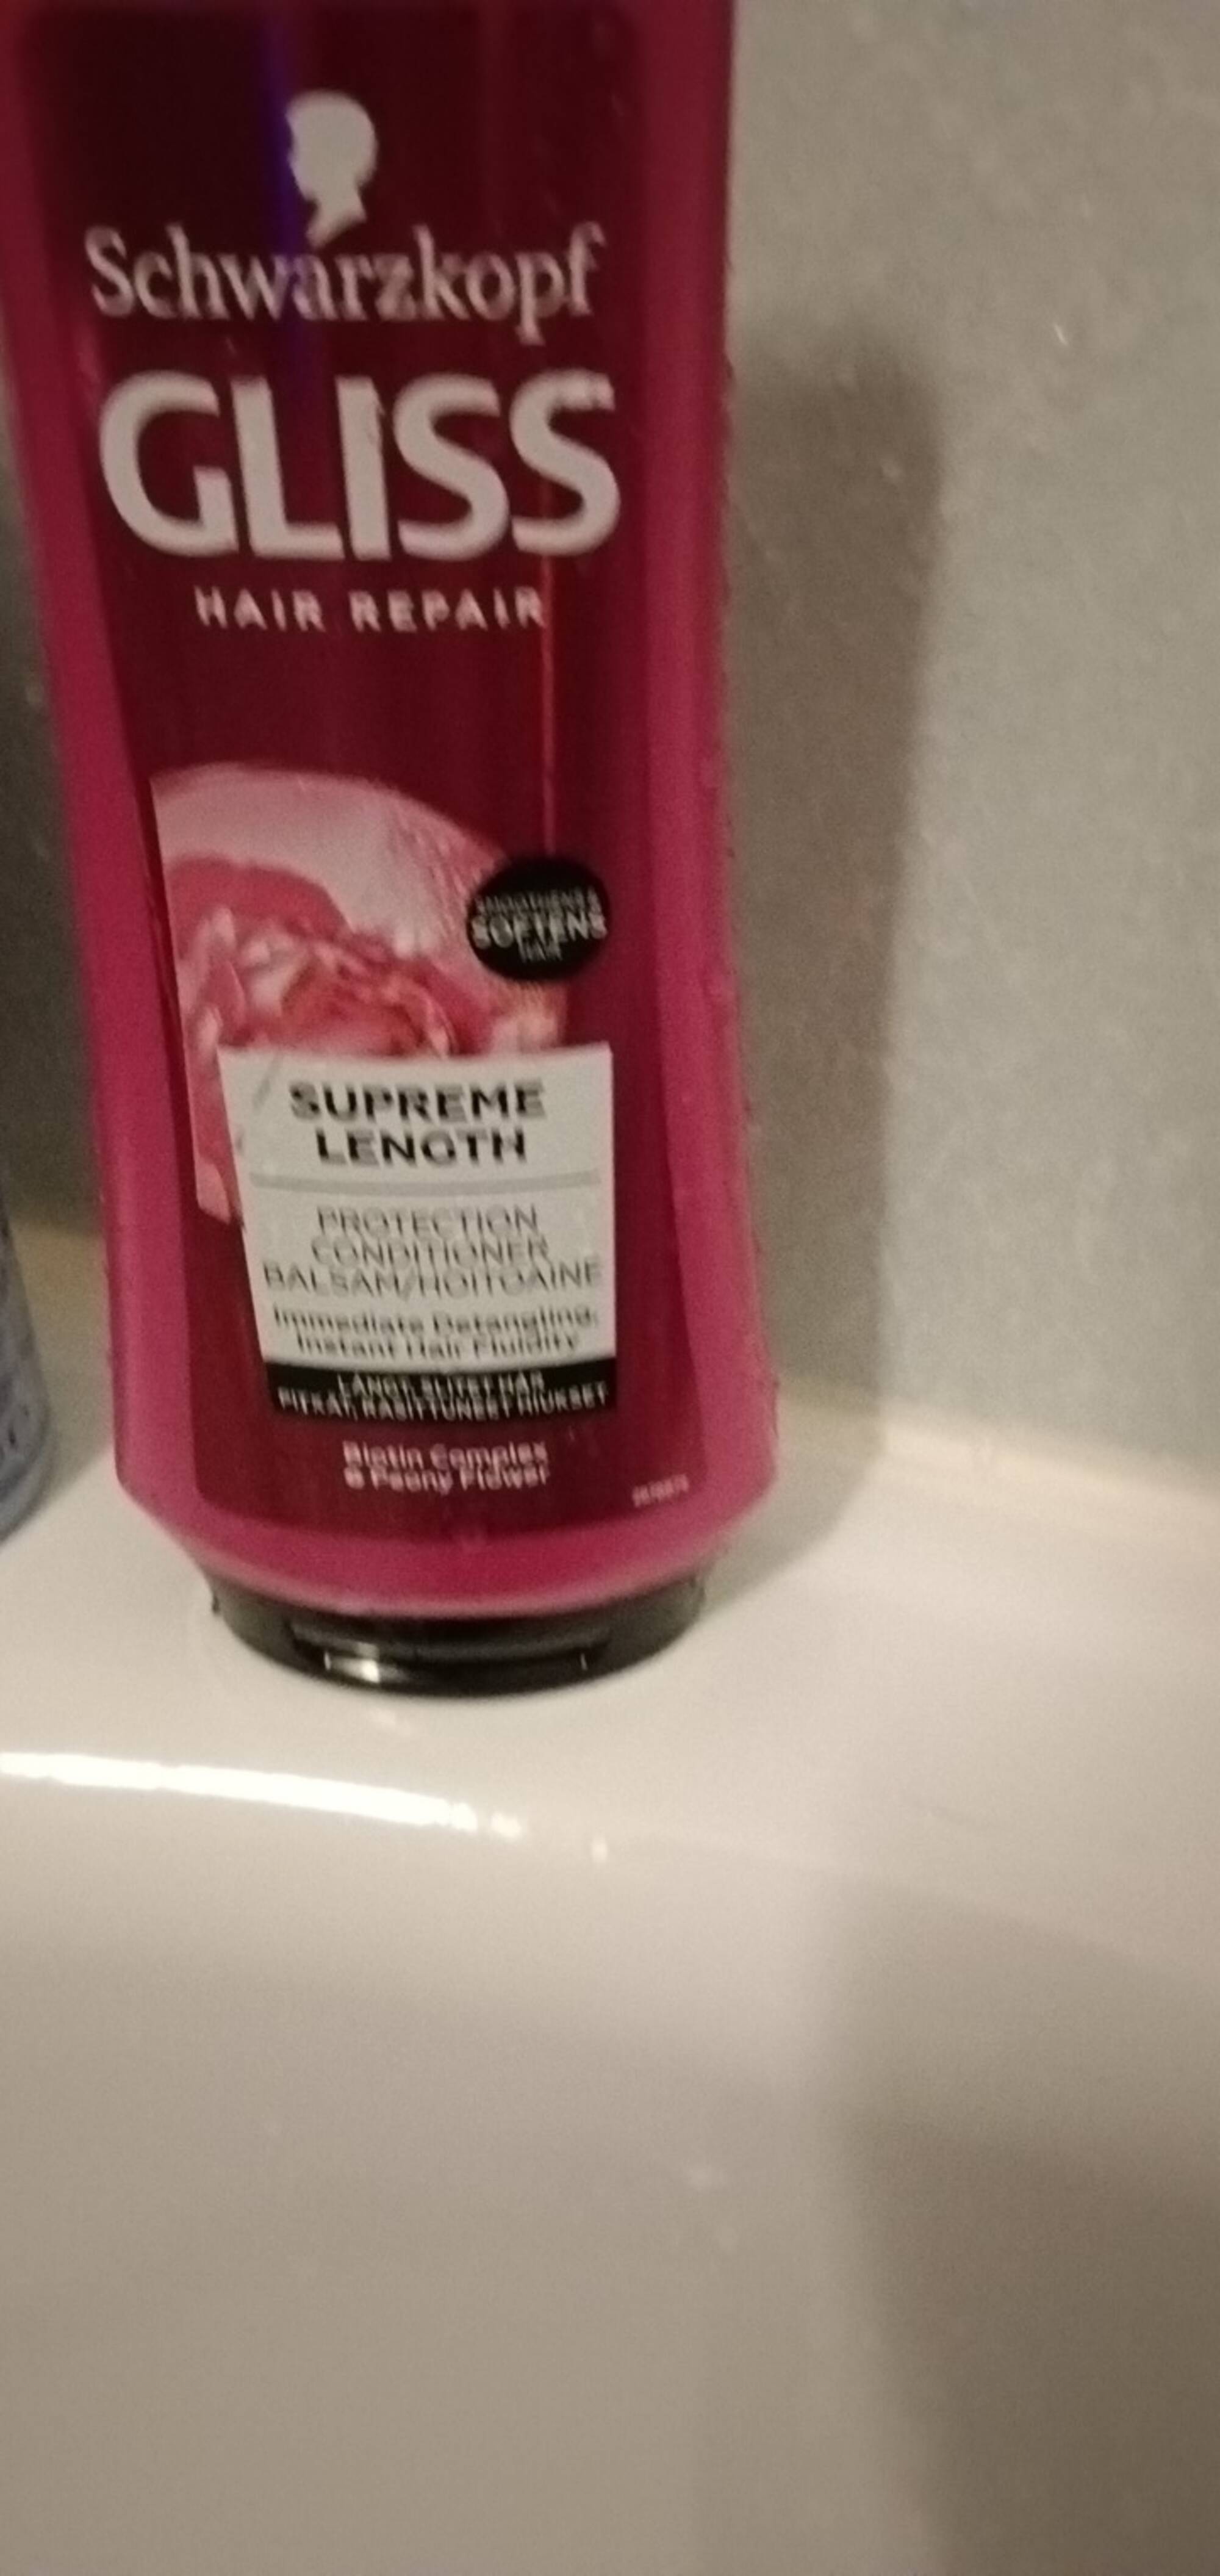 SCHWARZKOPF - Gliss hair repair Supreme length - Protection conditioner